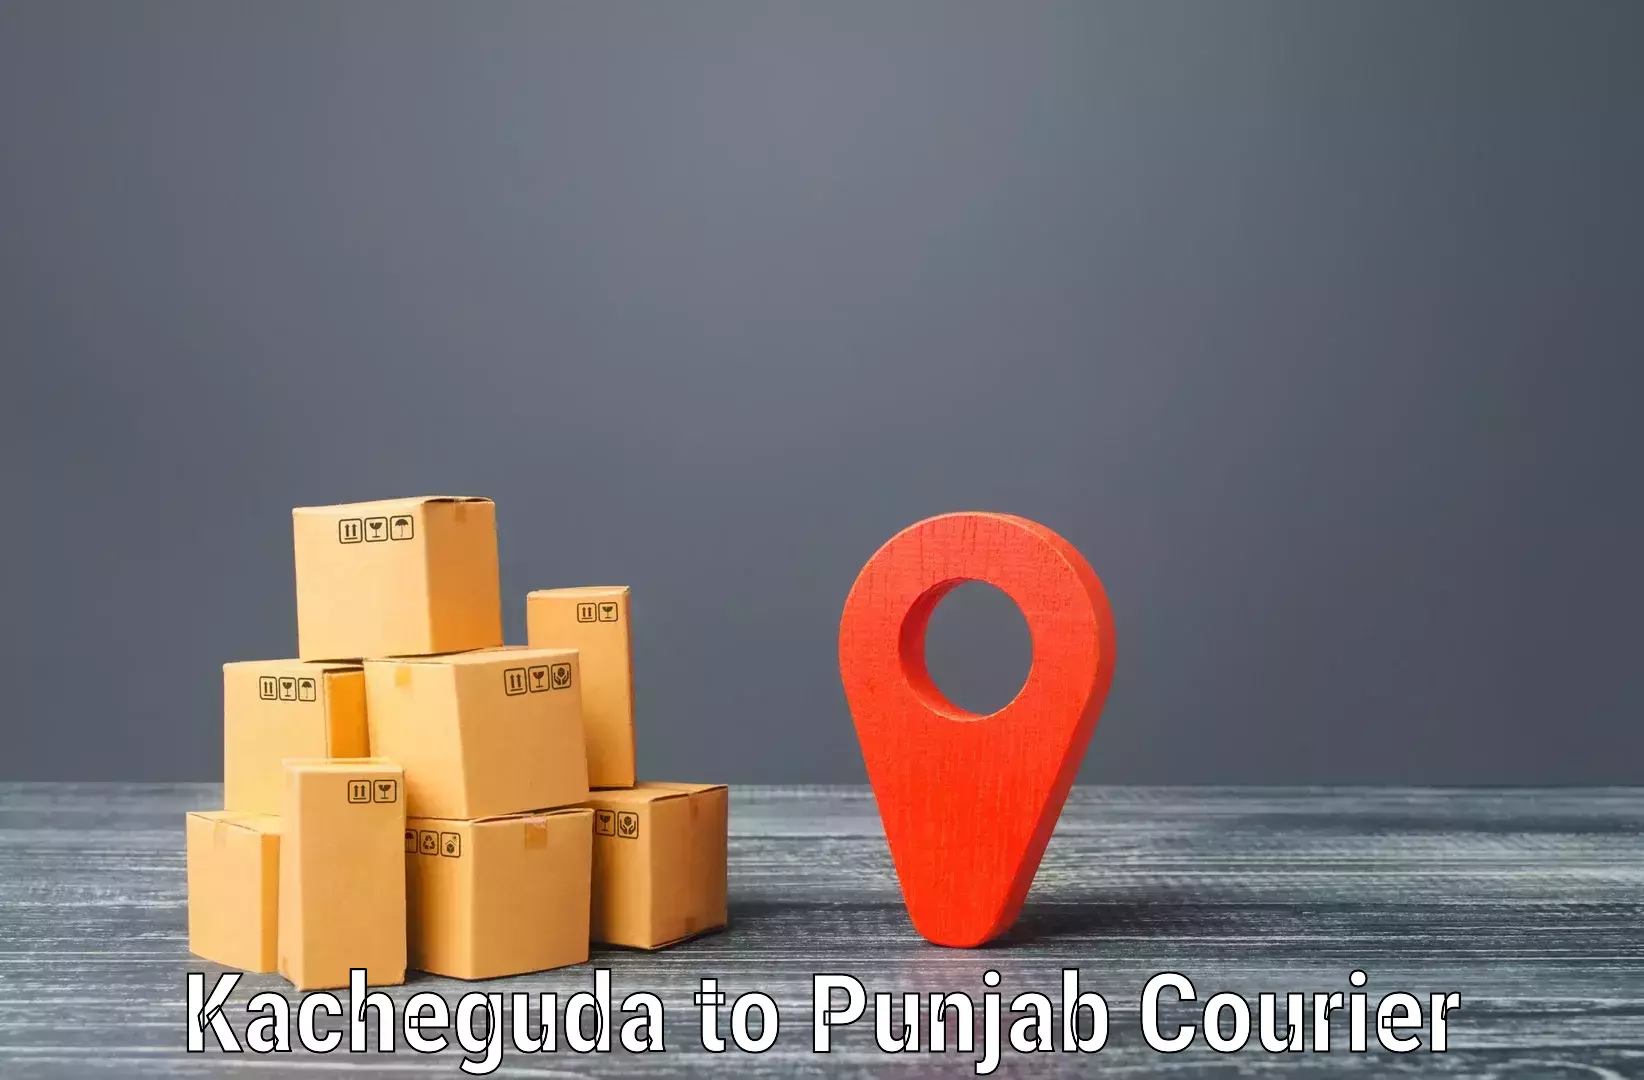 Reliable courier service in Kacheguda to Punjab